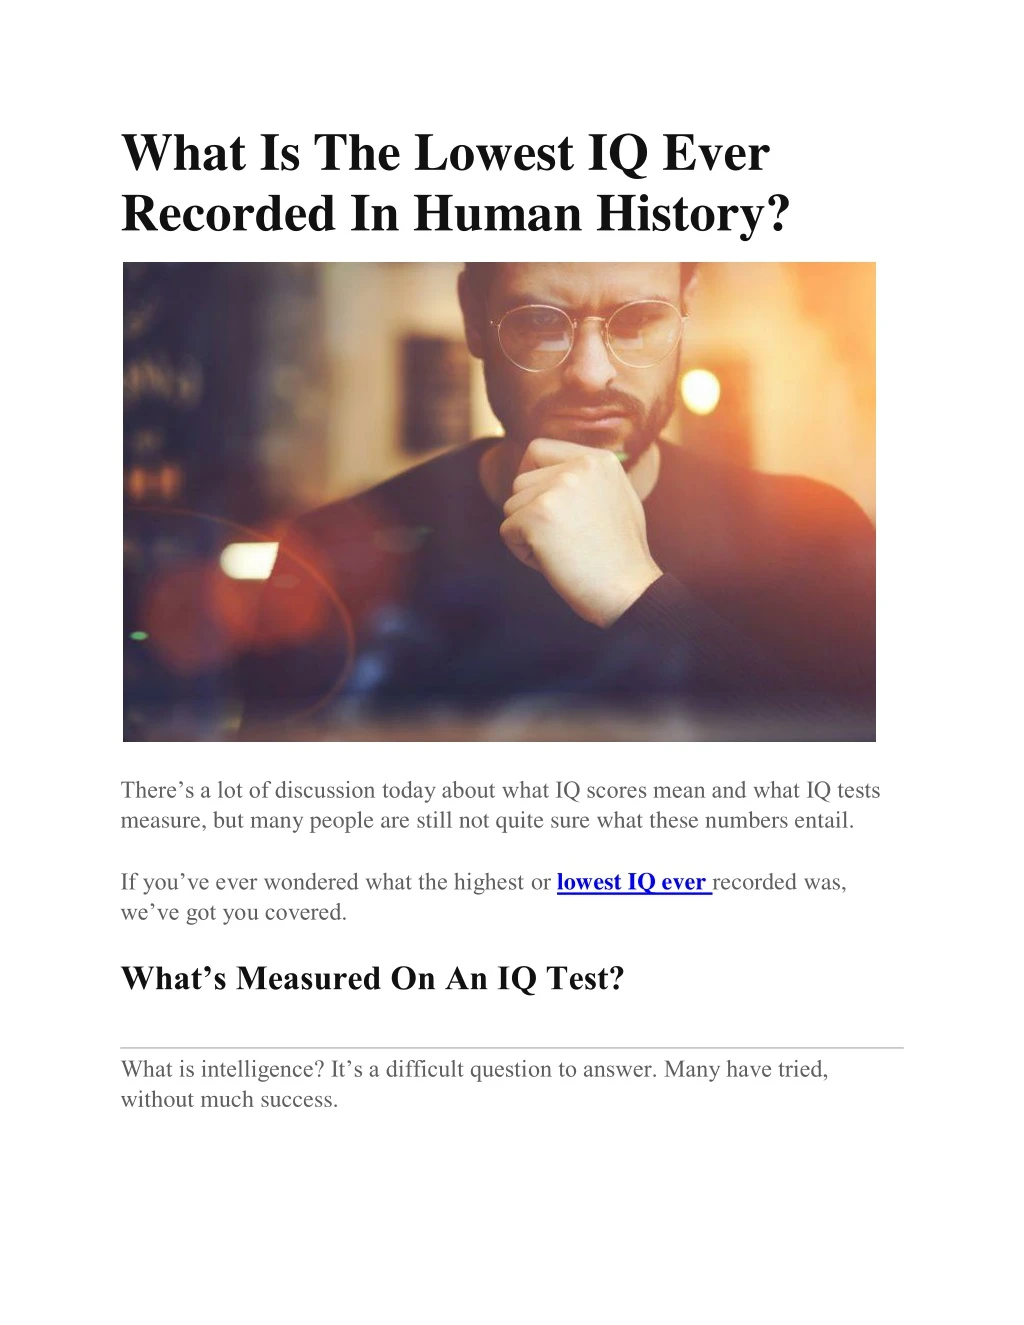 what is the lowest iq ever recorded in human